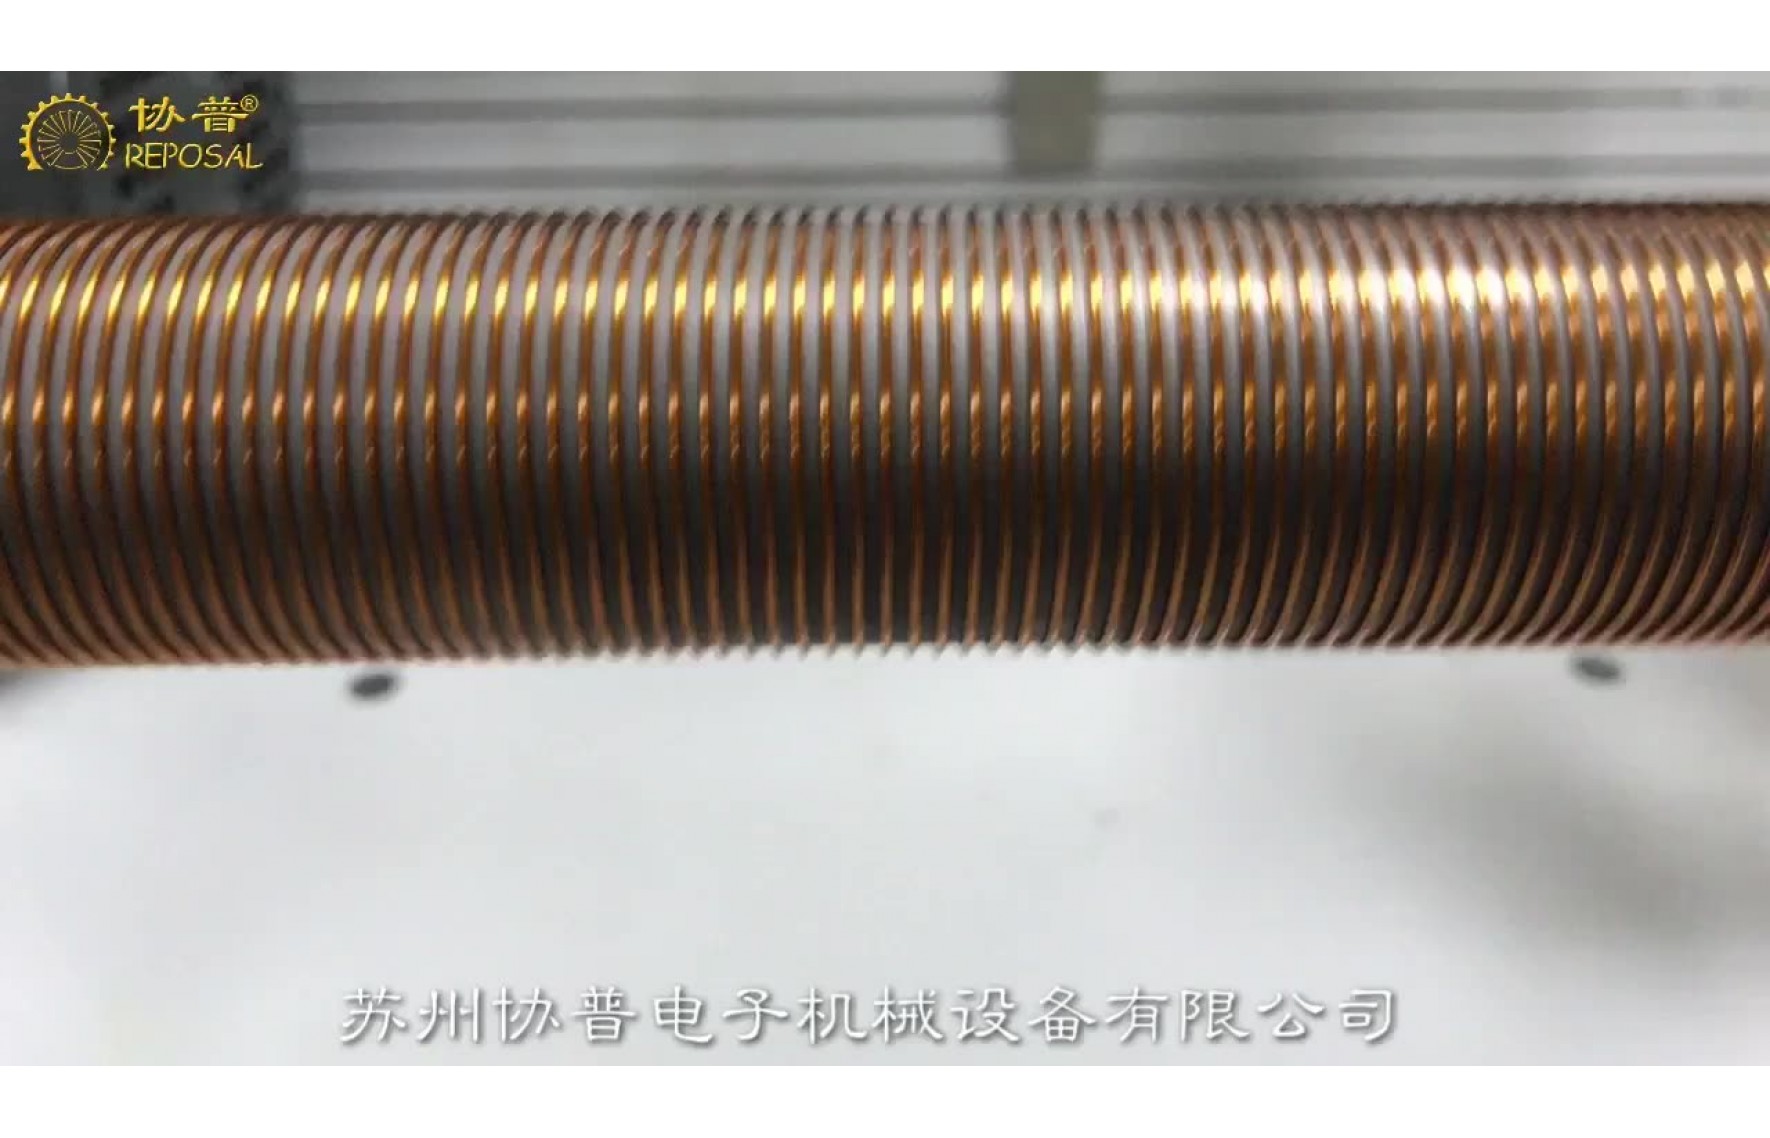 Electric Coil Heating Industry